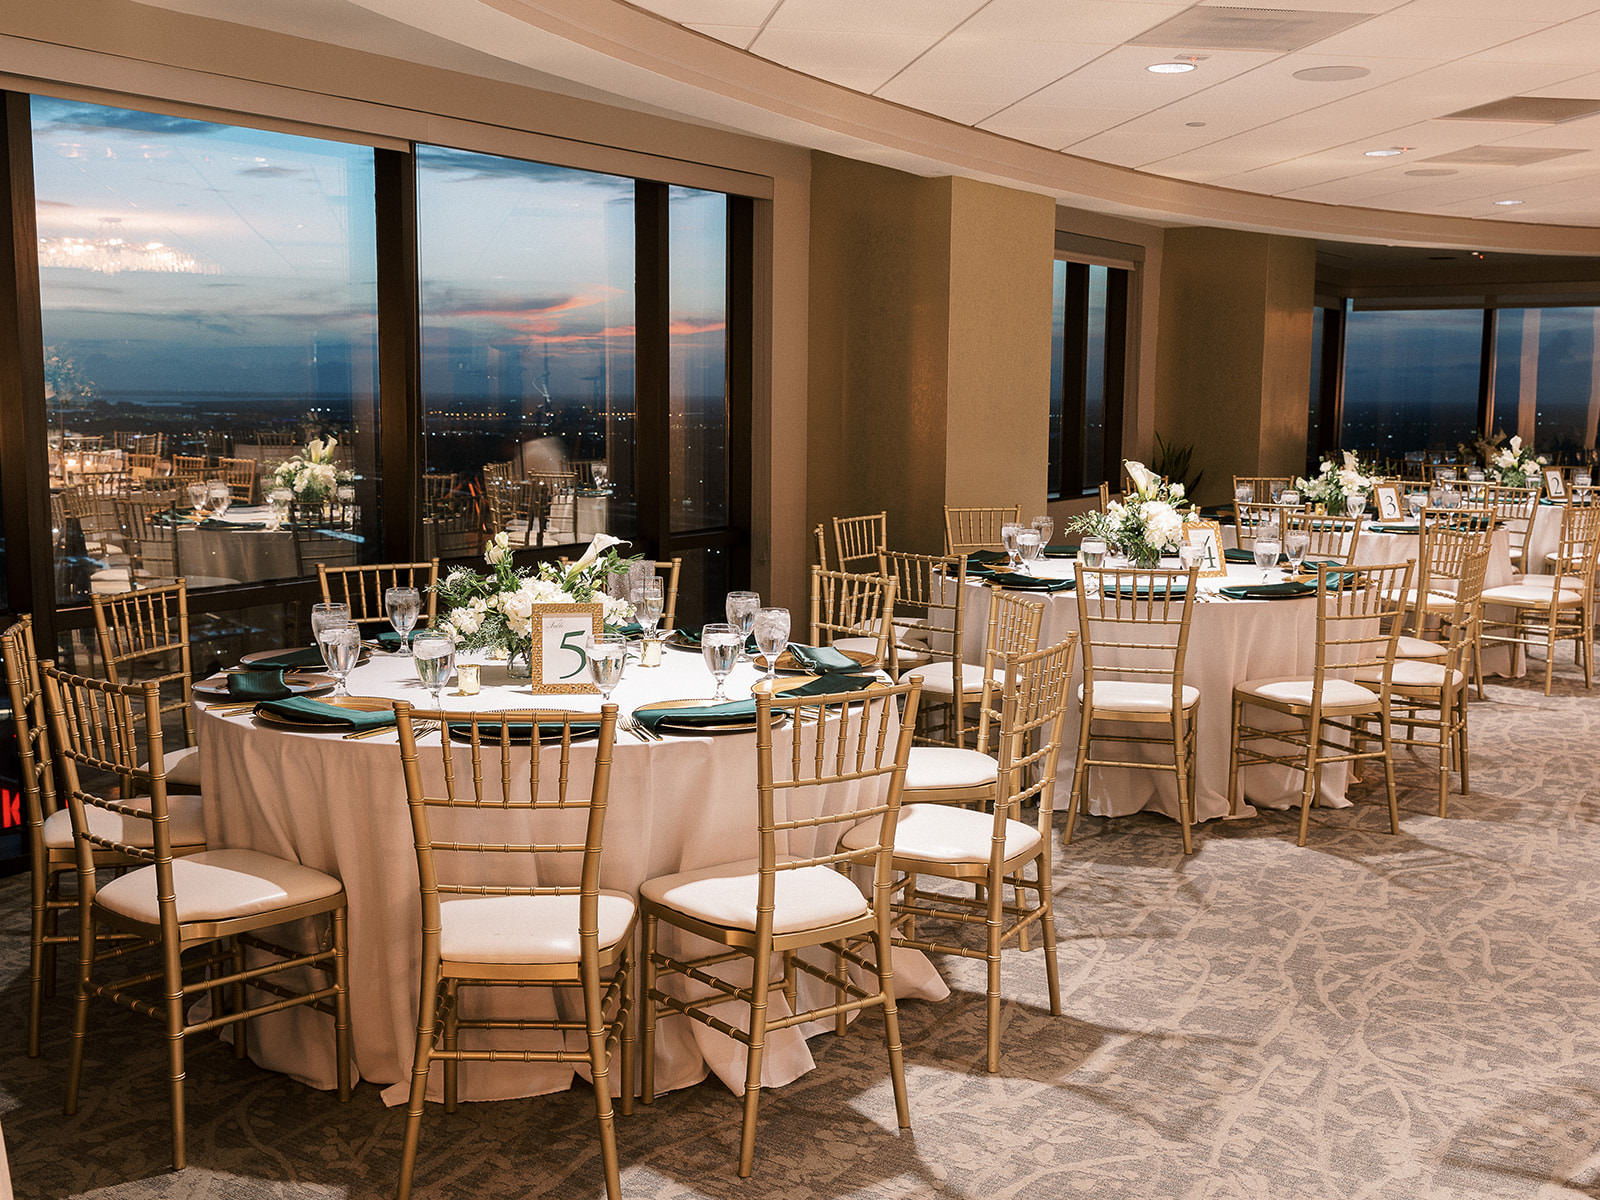 Sunset Skyline Evening Wedding Reception | Over The Top Linen Rentals | Downtown Tampa Venue Venue The Tampa Club